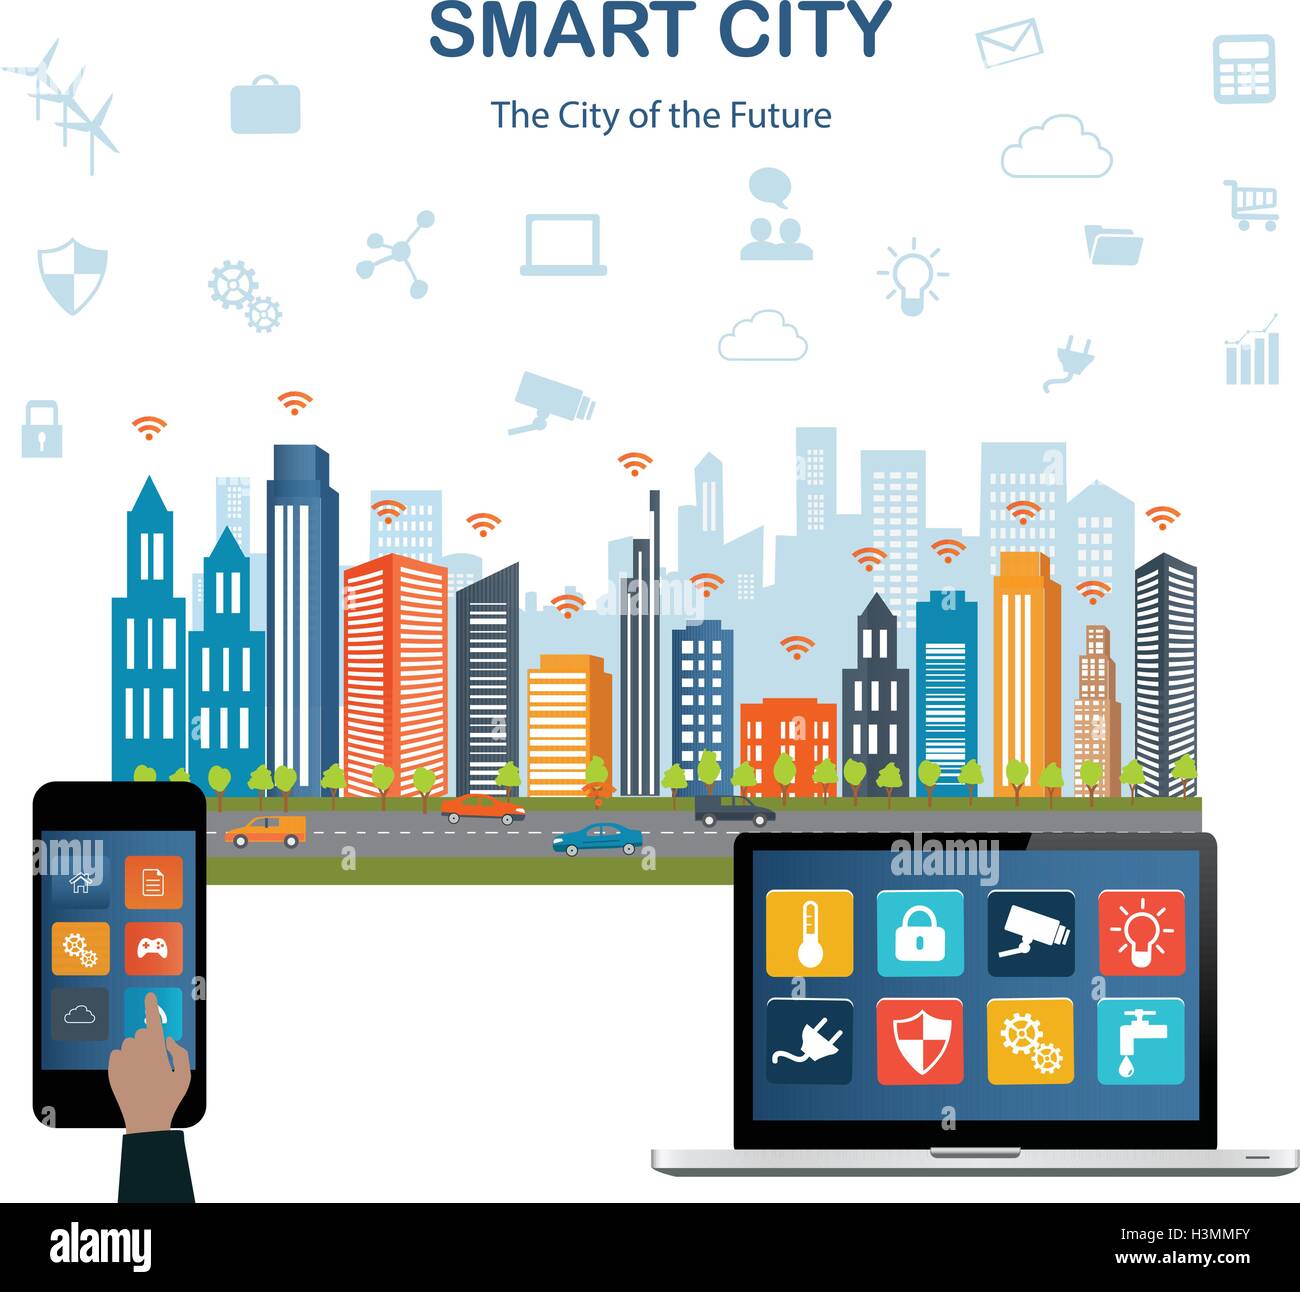 Smart city concept with different icon and elements. Modern city design with  future technology for living. Stock Vector